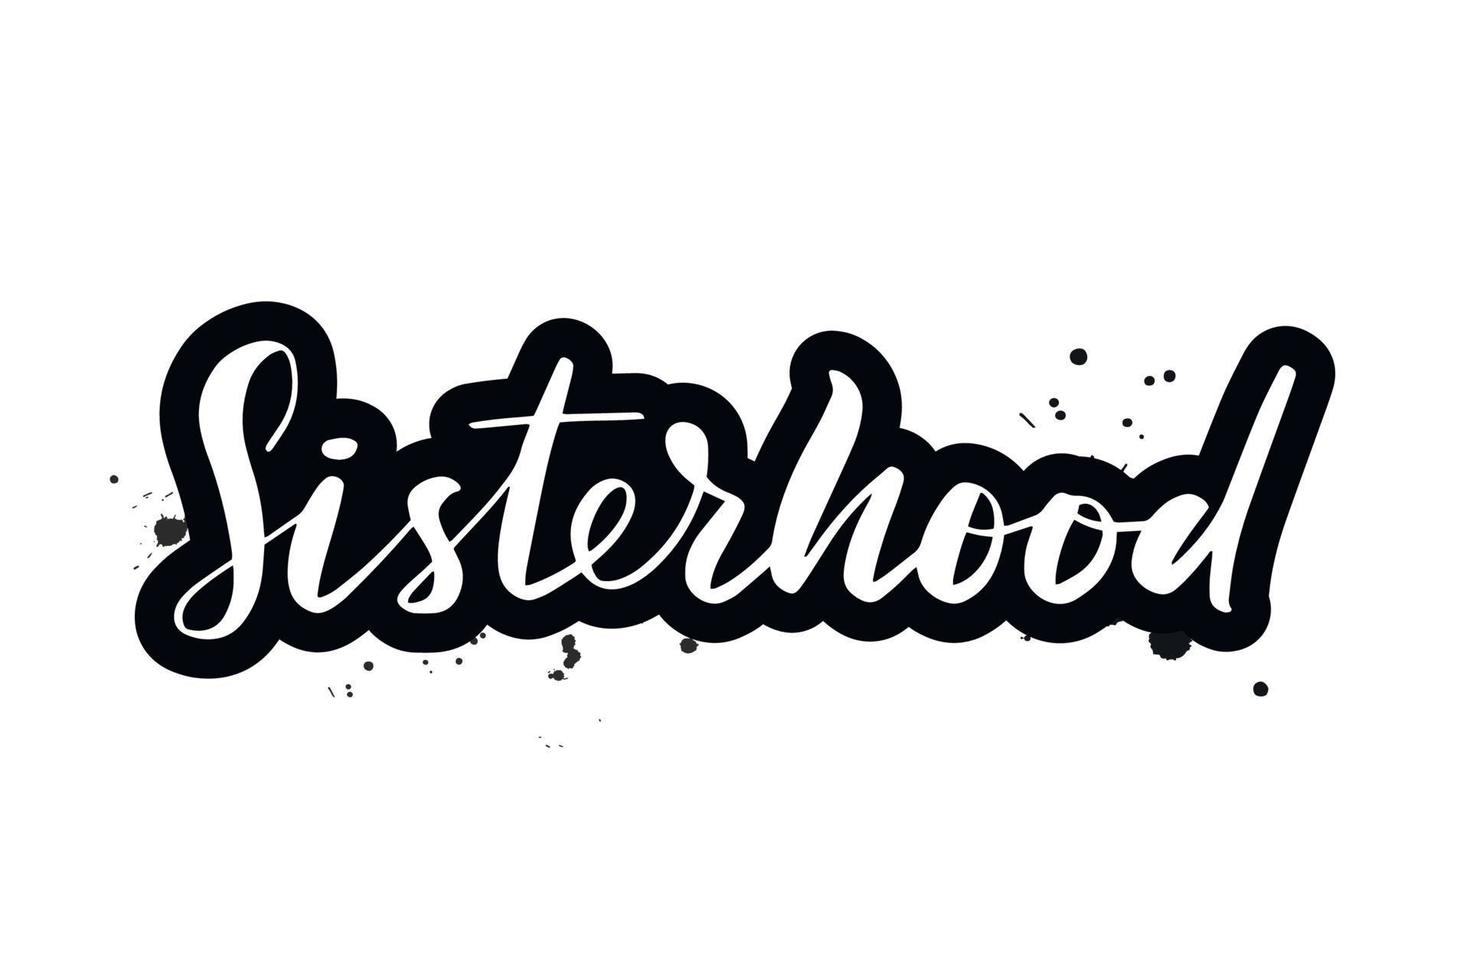 Inspirational handwritten brush lettering sisterhood. Vector calligraphy illustration isolated on white background. Typography for banners, badges, postcard, t-shirt, prints, posters.